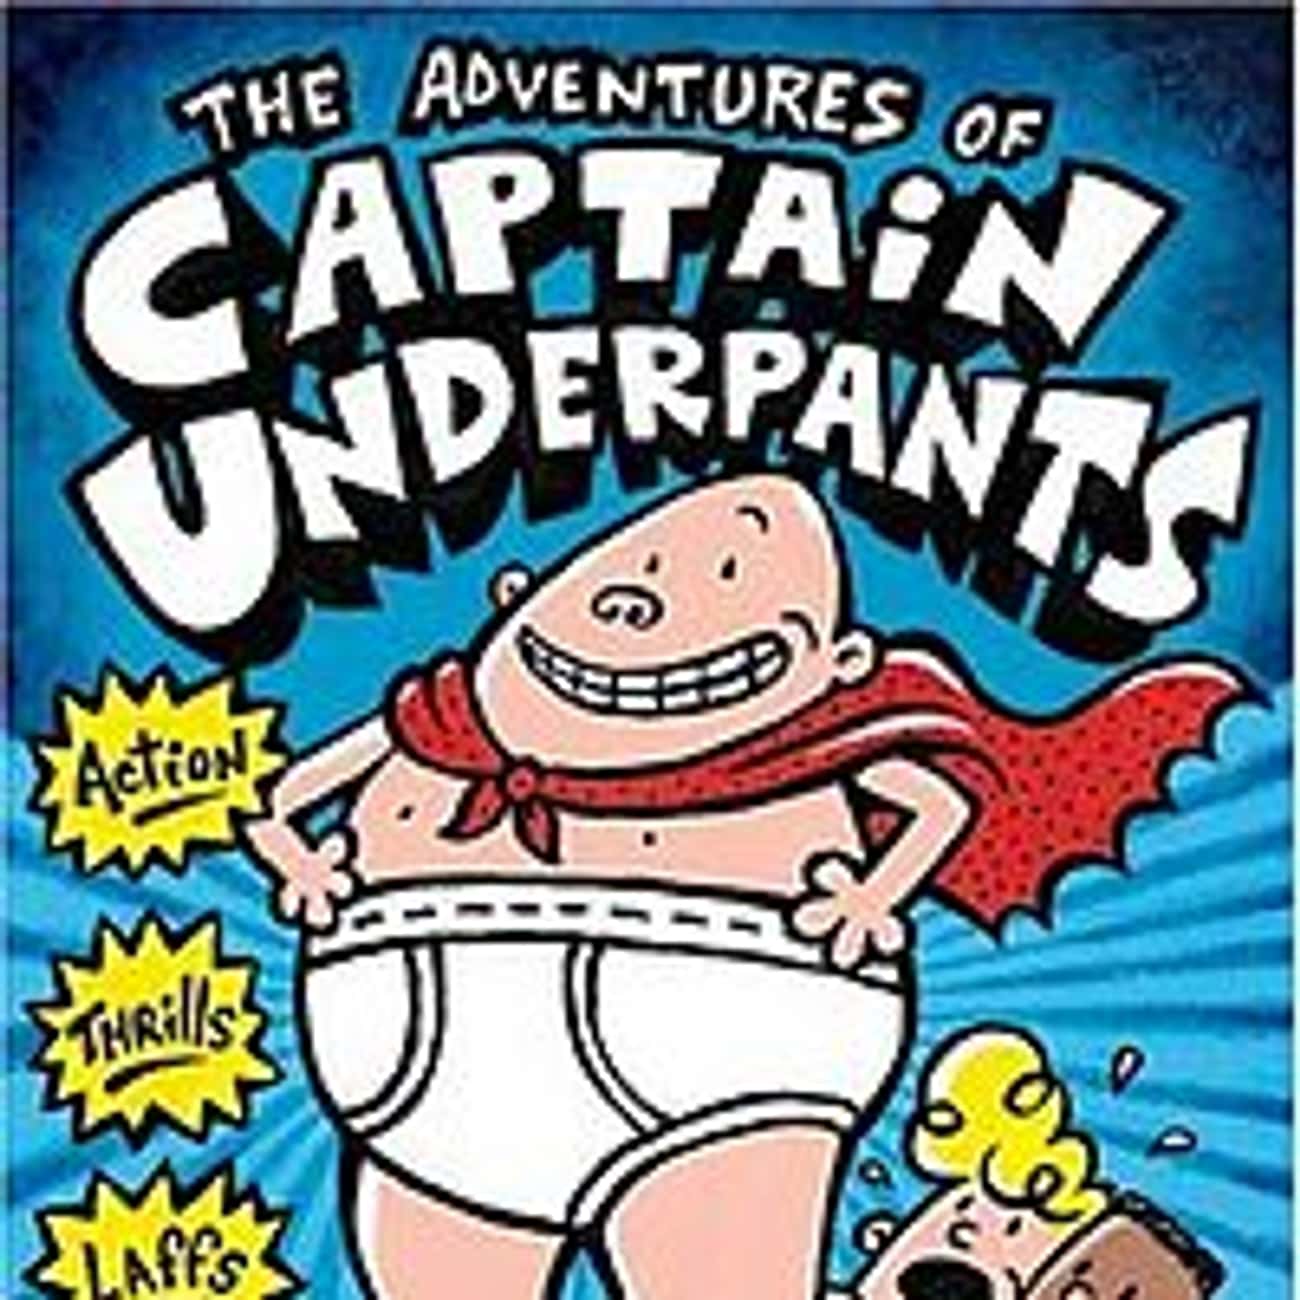 Captain Underpants Taught Kids To Disobey Authority